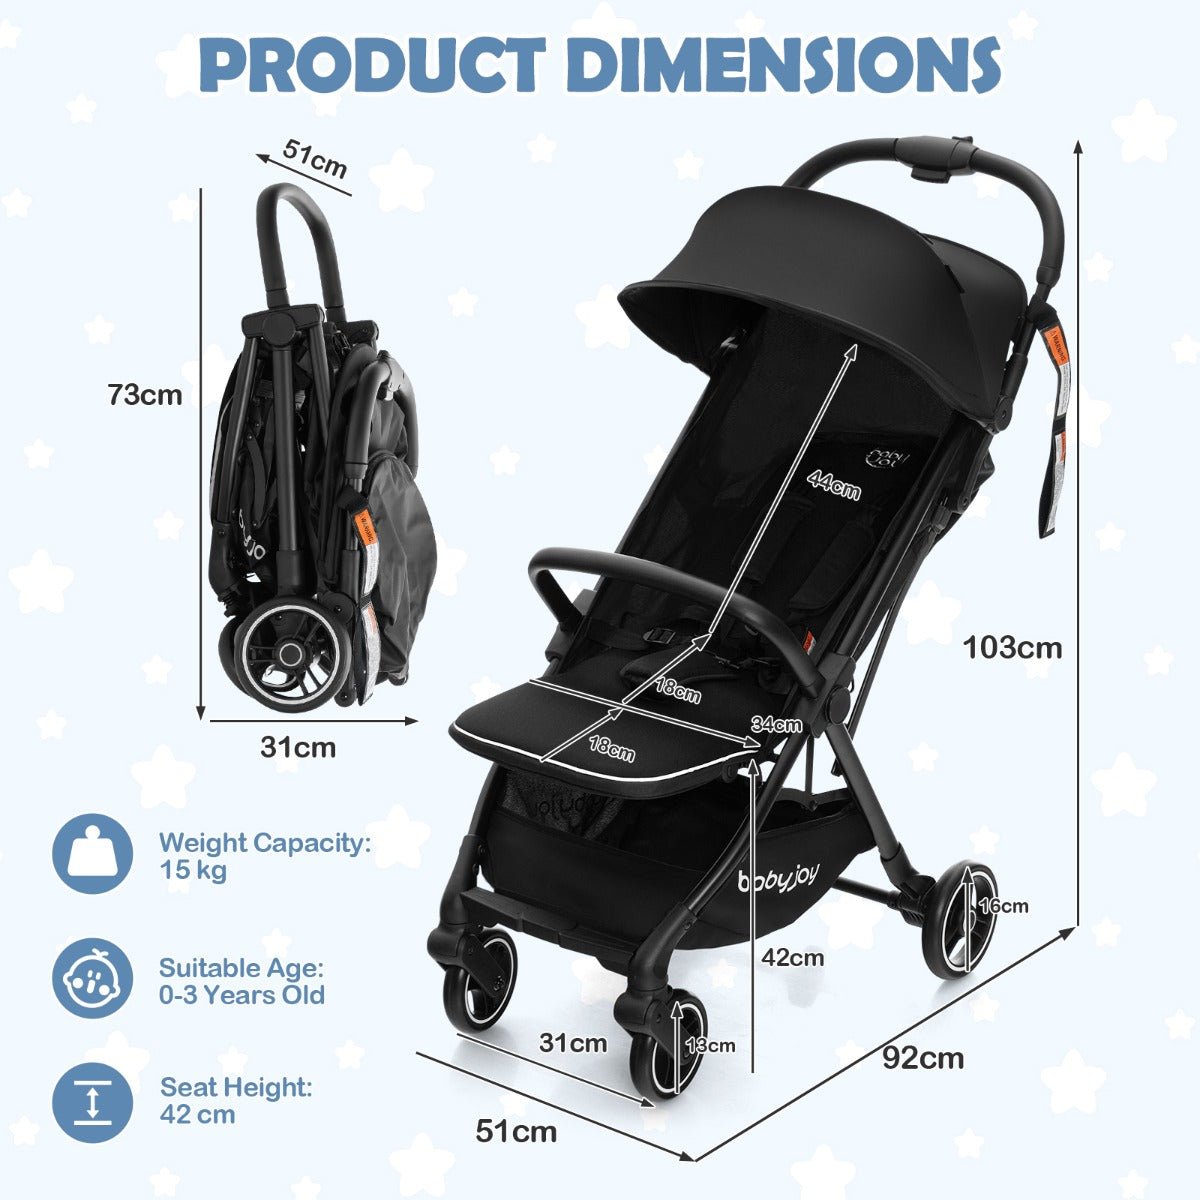 Explore with Ease: Black Folding Baby Stroller